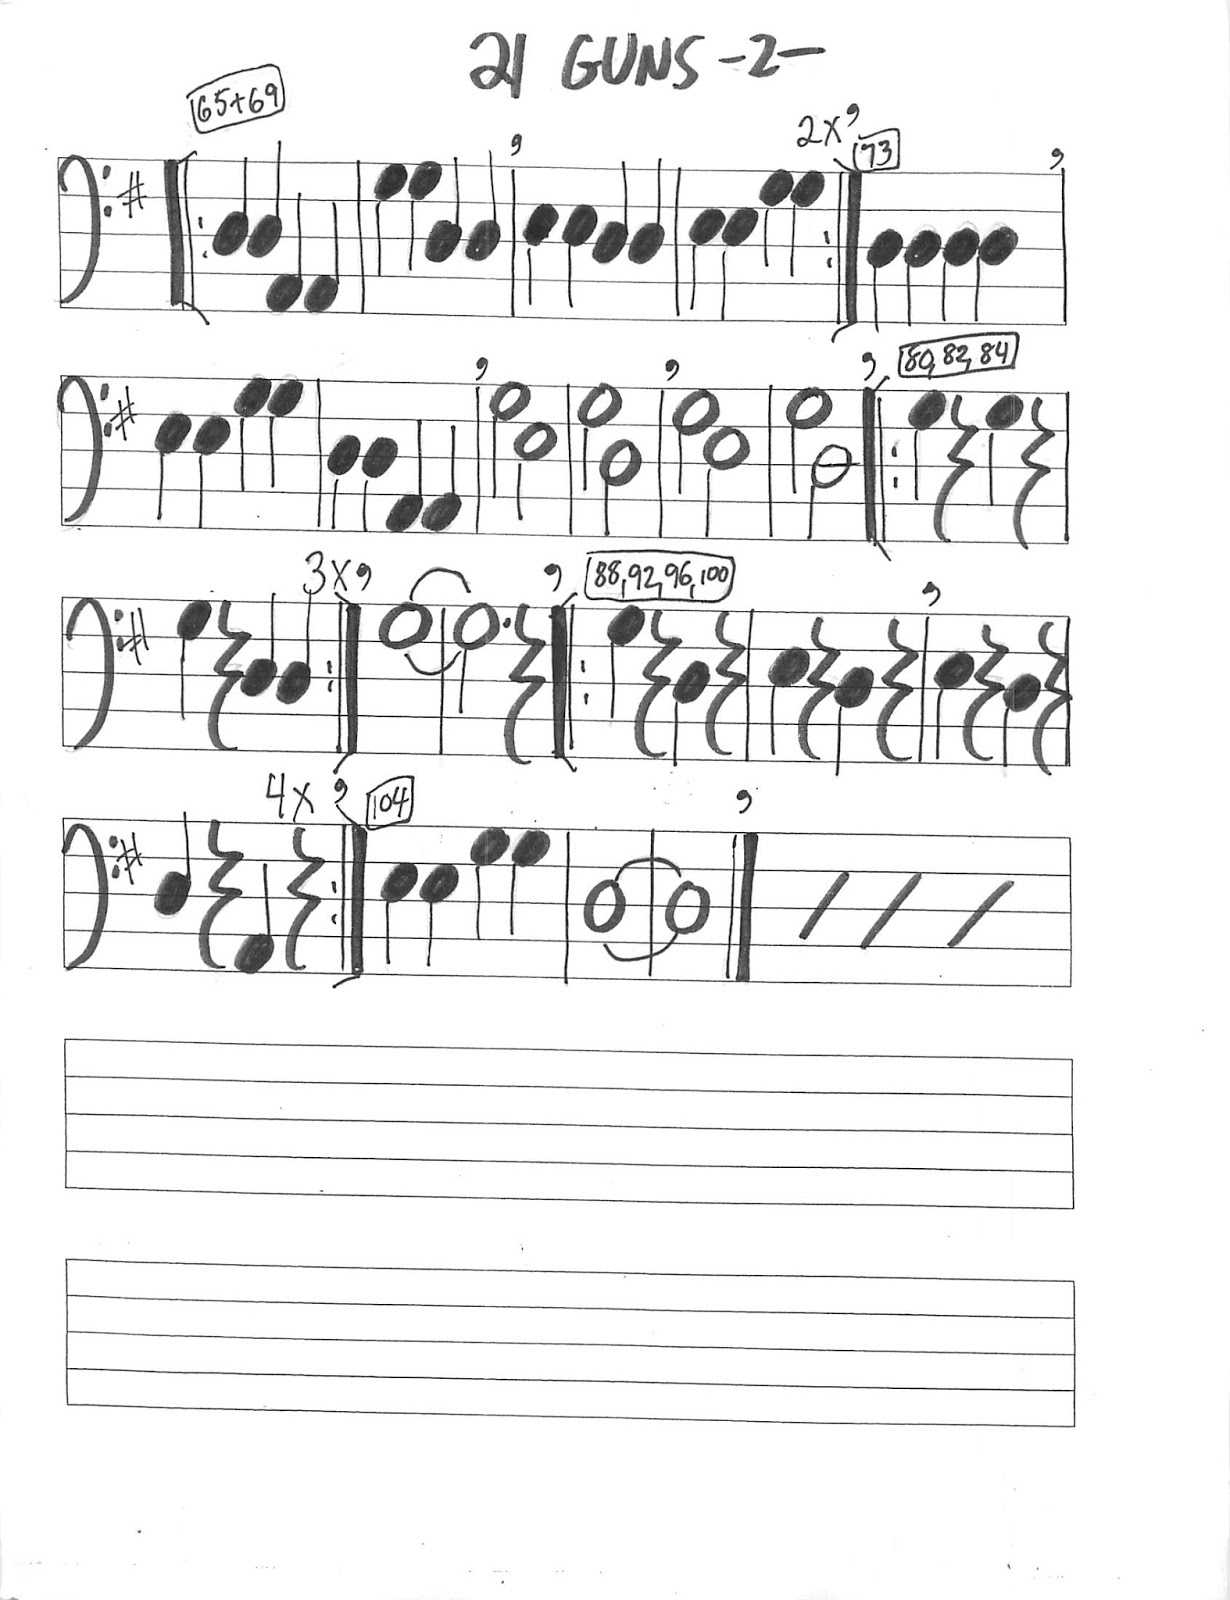 Donald In Mathmagic Land Worksheet Answers together with Miss Jacobson S Music Spring Concert Music 2014 21 Guns